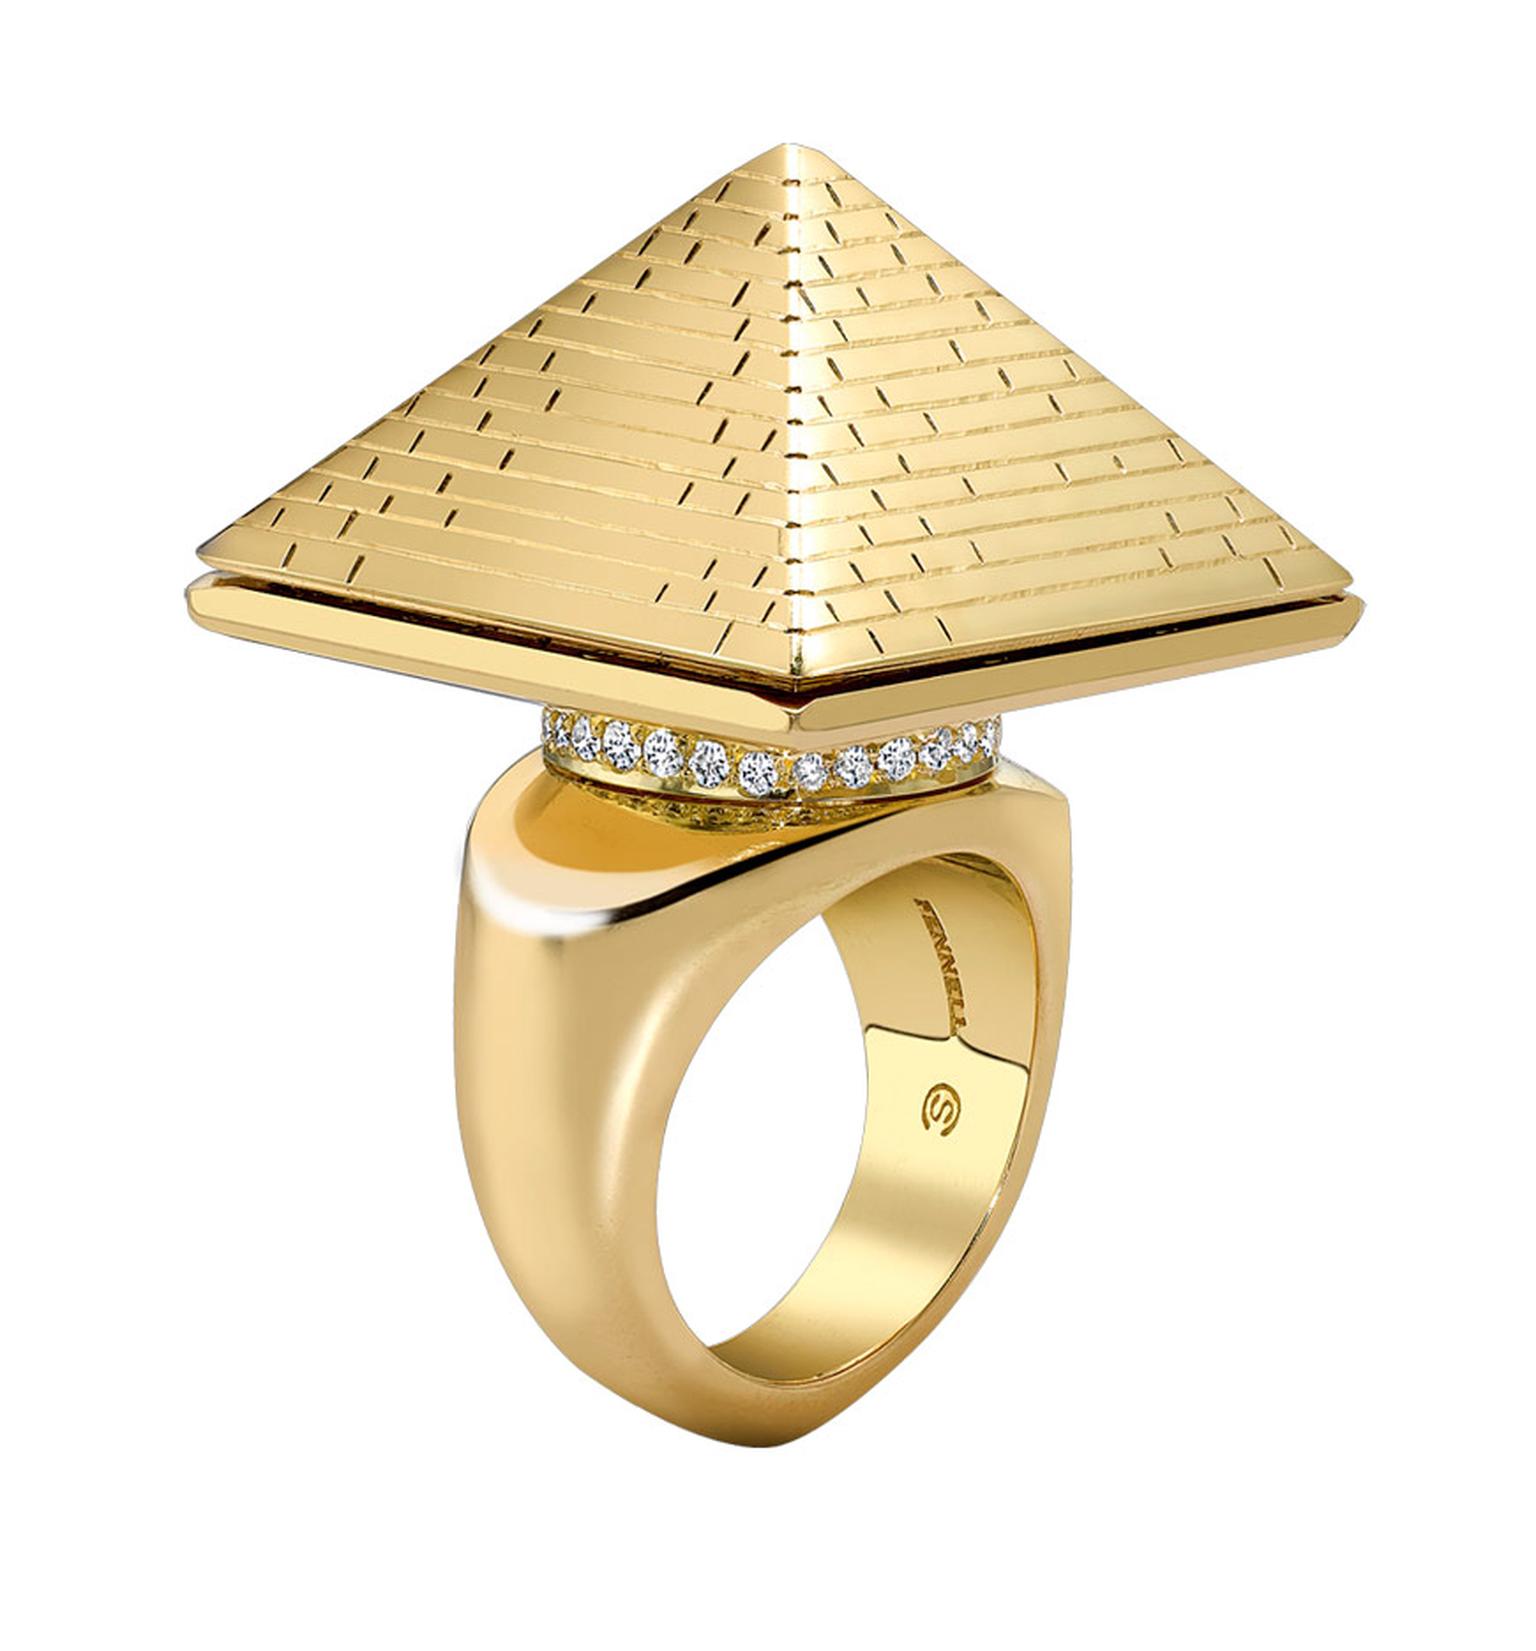 Theo-Fennell-Pyramid-Ring